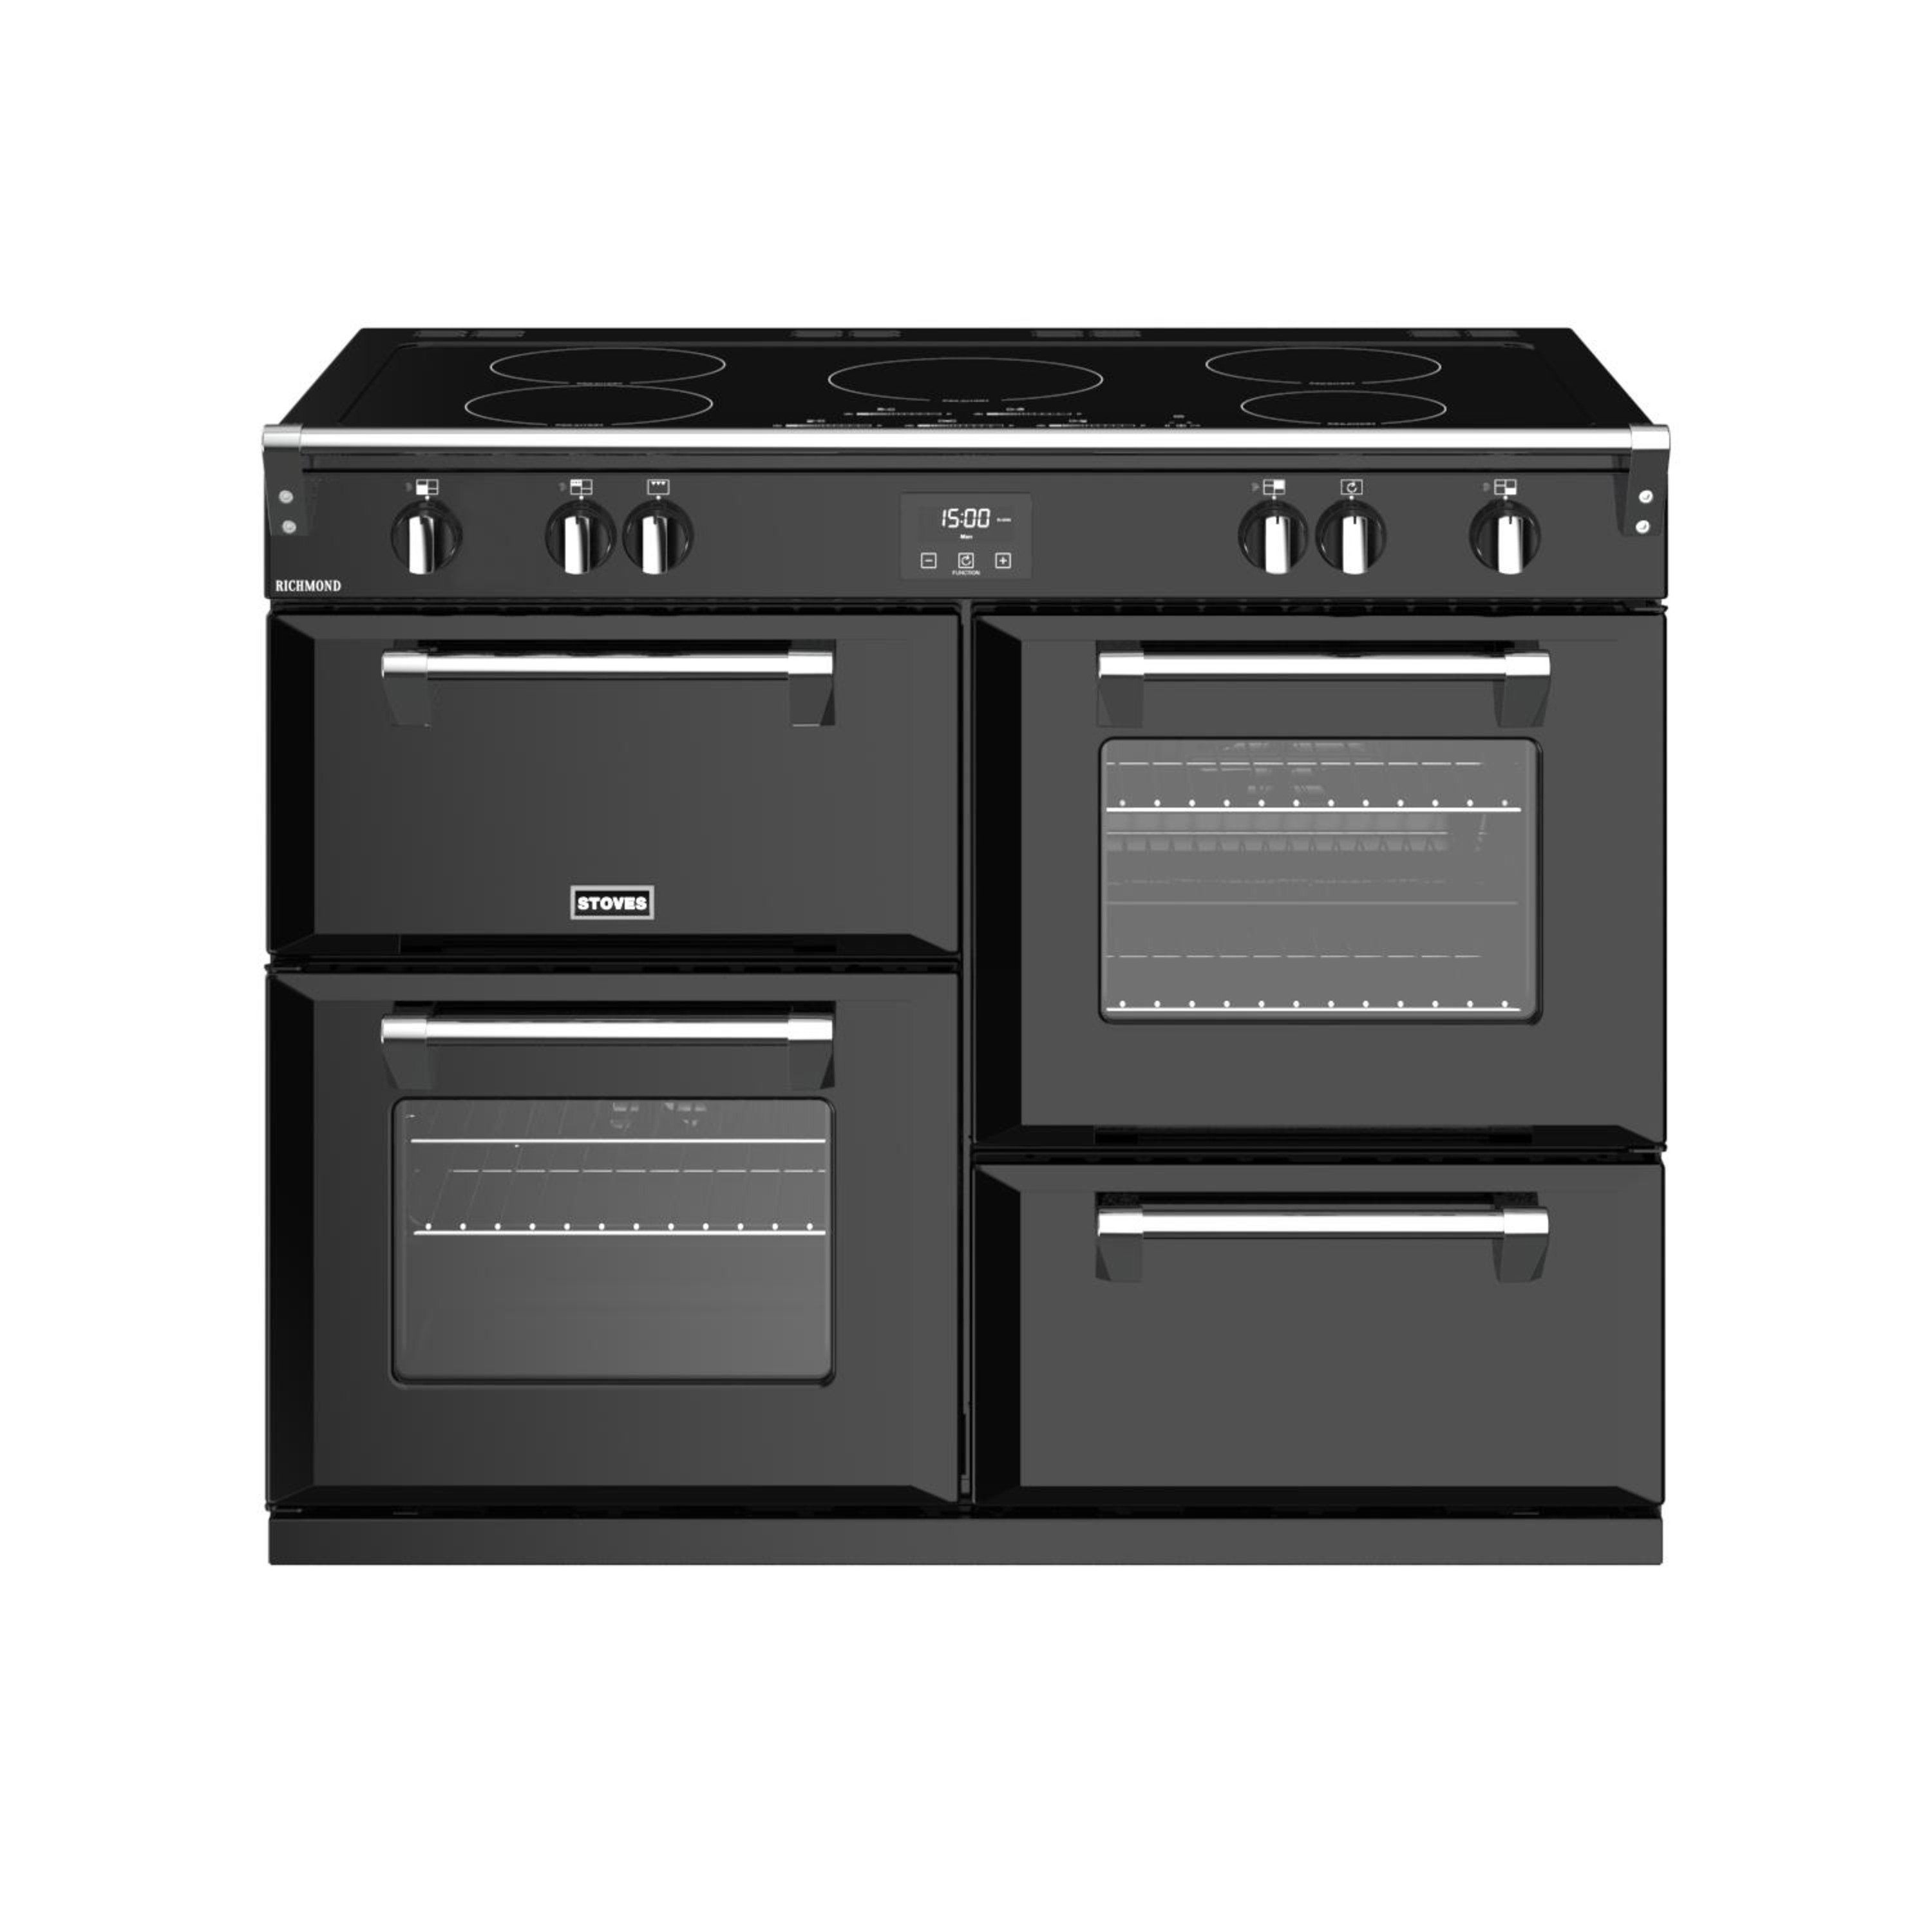 110cm electric induction range cooker with a 5 zone touch control induction hob, conventional oven & grill, multifunction main oven, fanned second oven, and dedicated slow cook oven